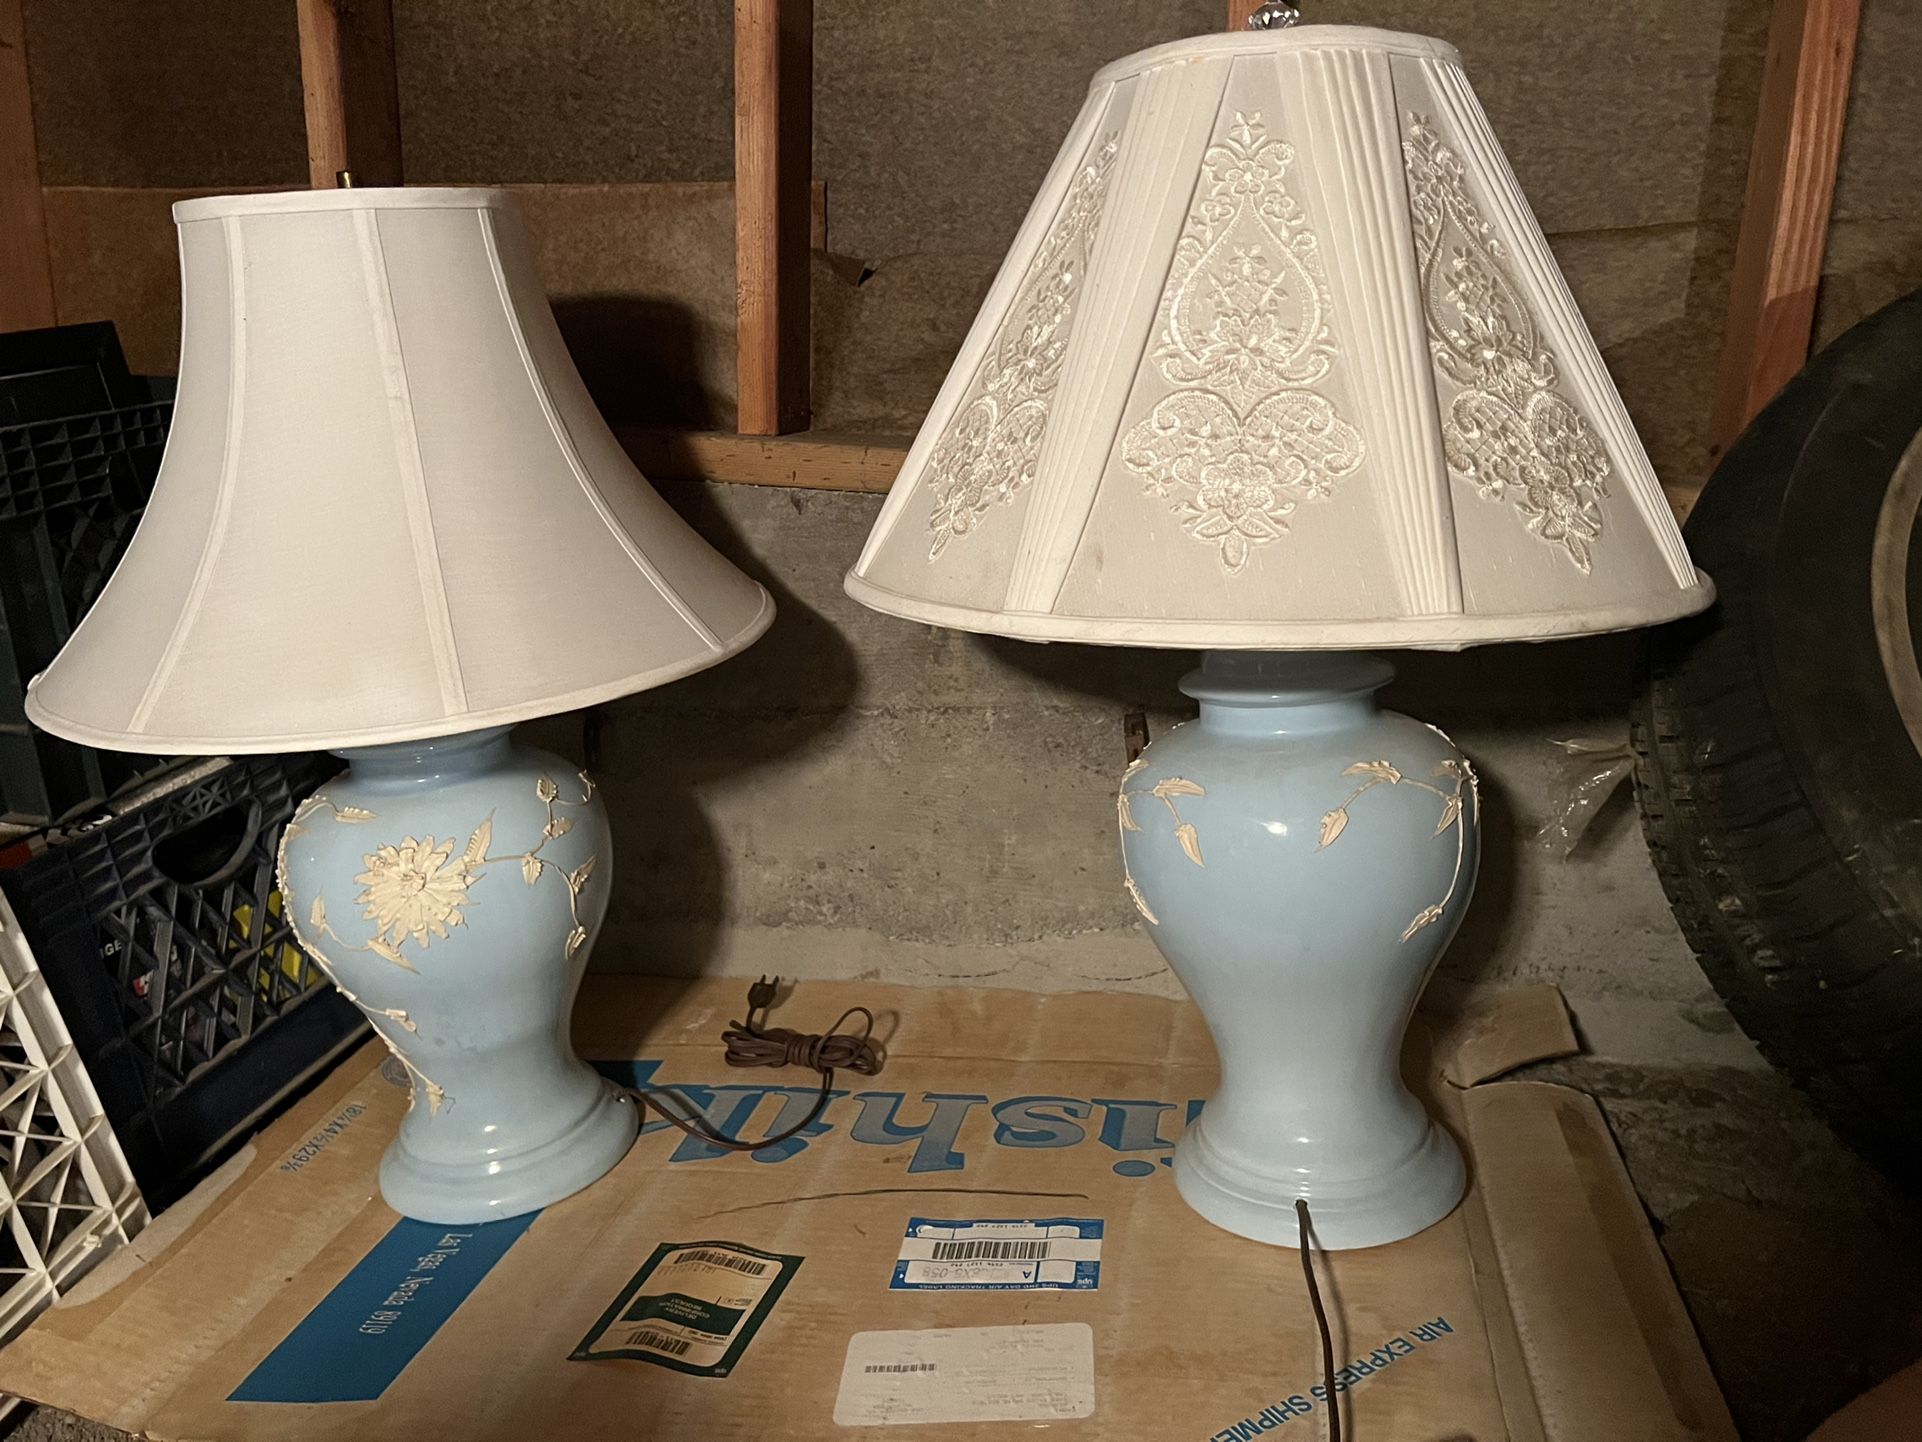 Matching in table lamps